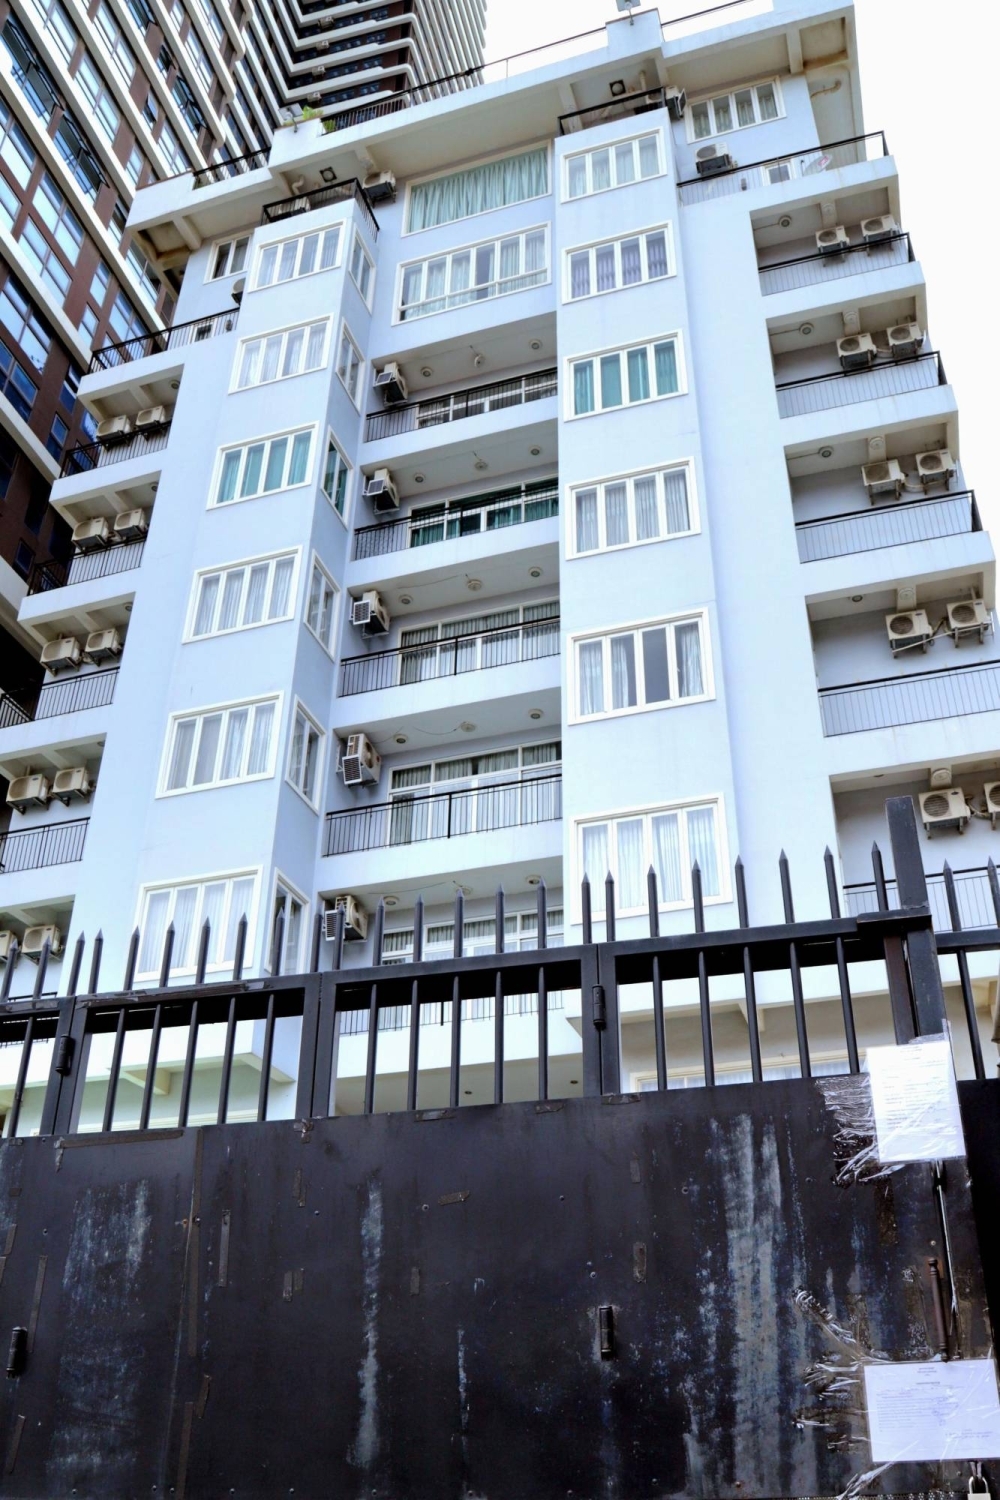 An apartment building in Phnom Penh where a group of Japanese nationals was detained for allegedly running a phone scam operation.